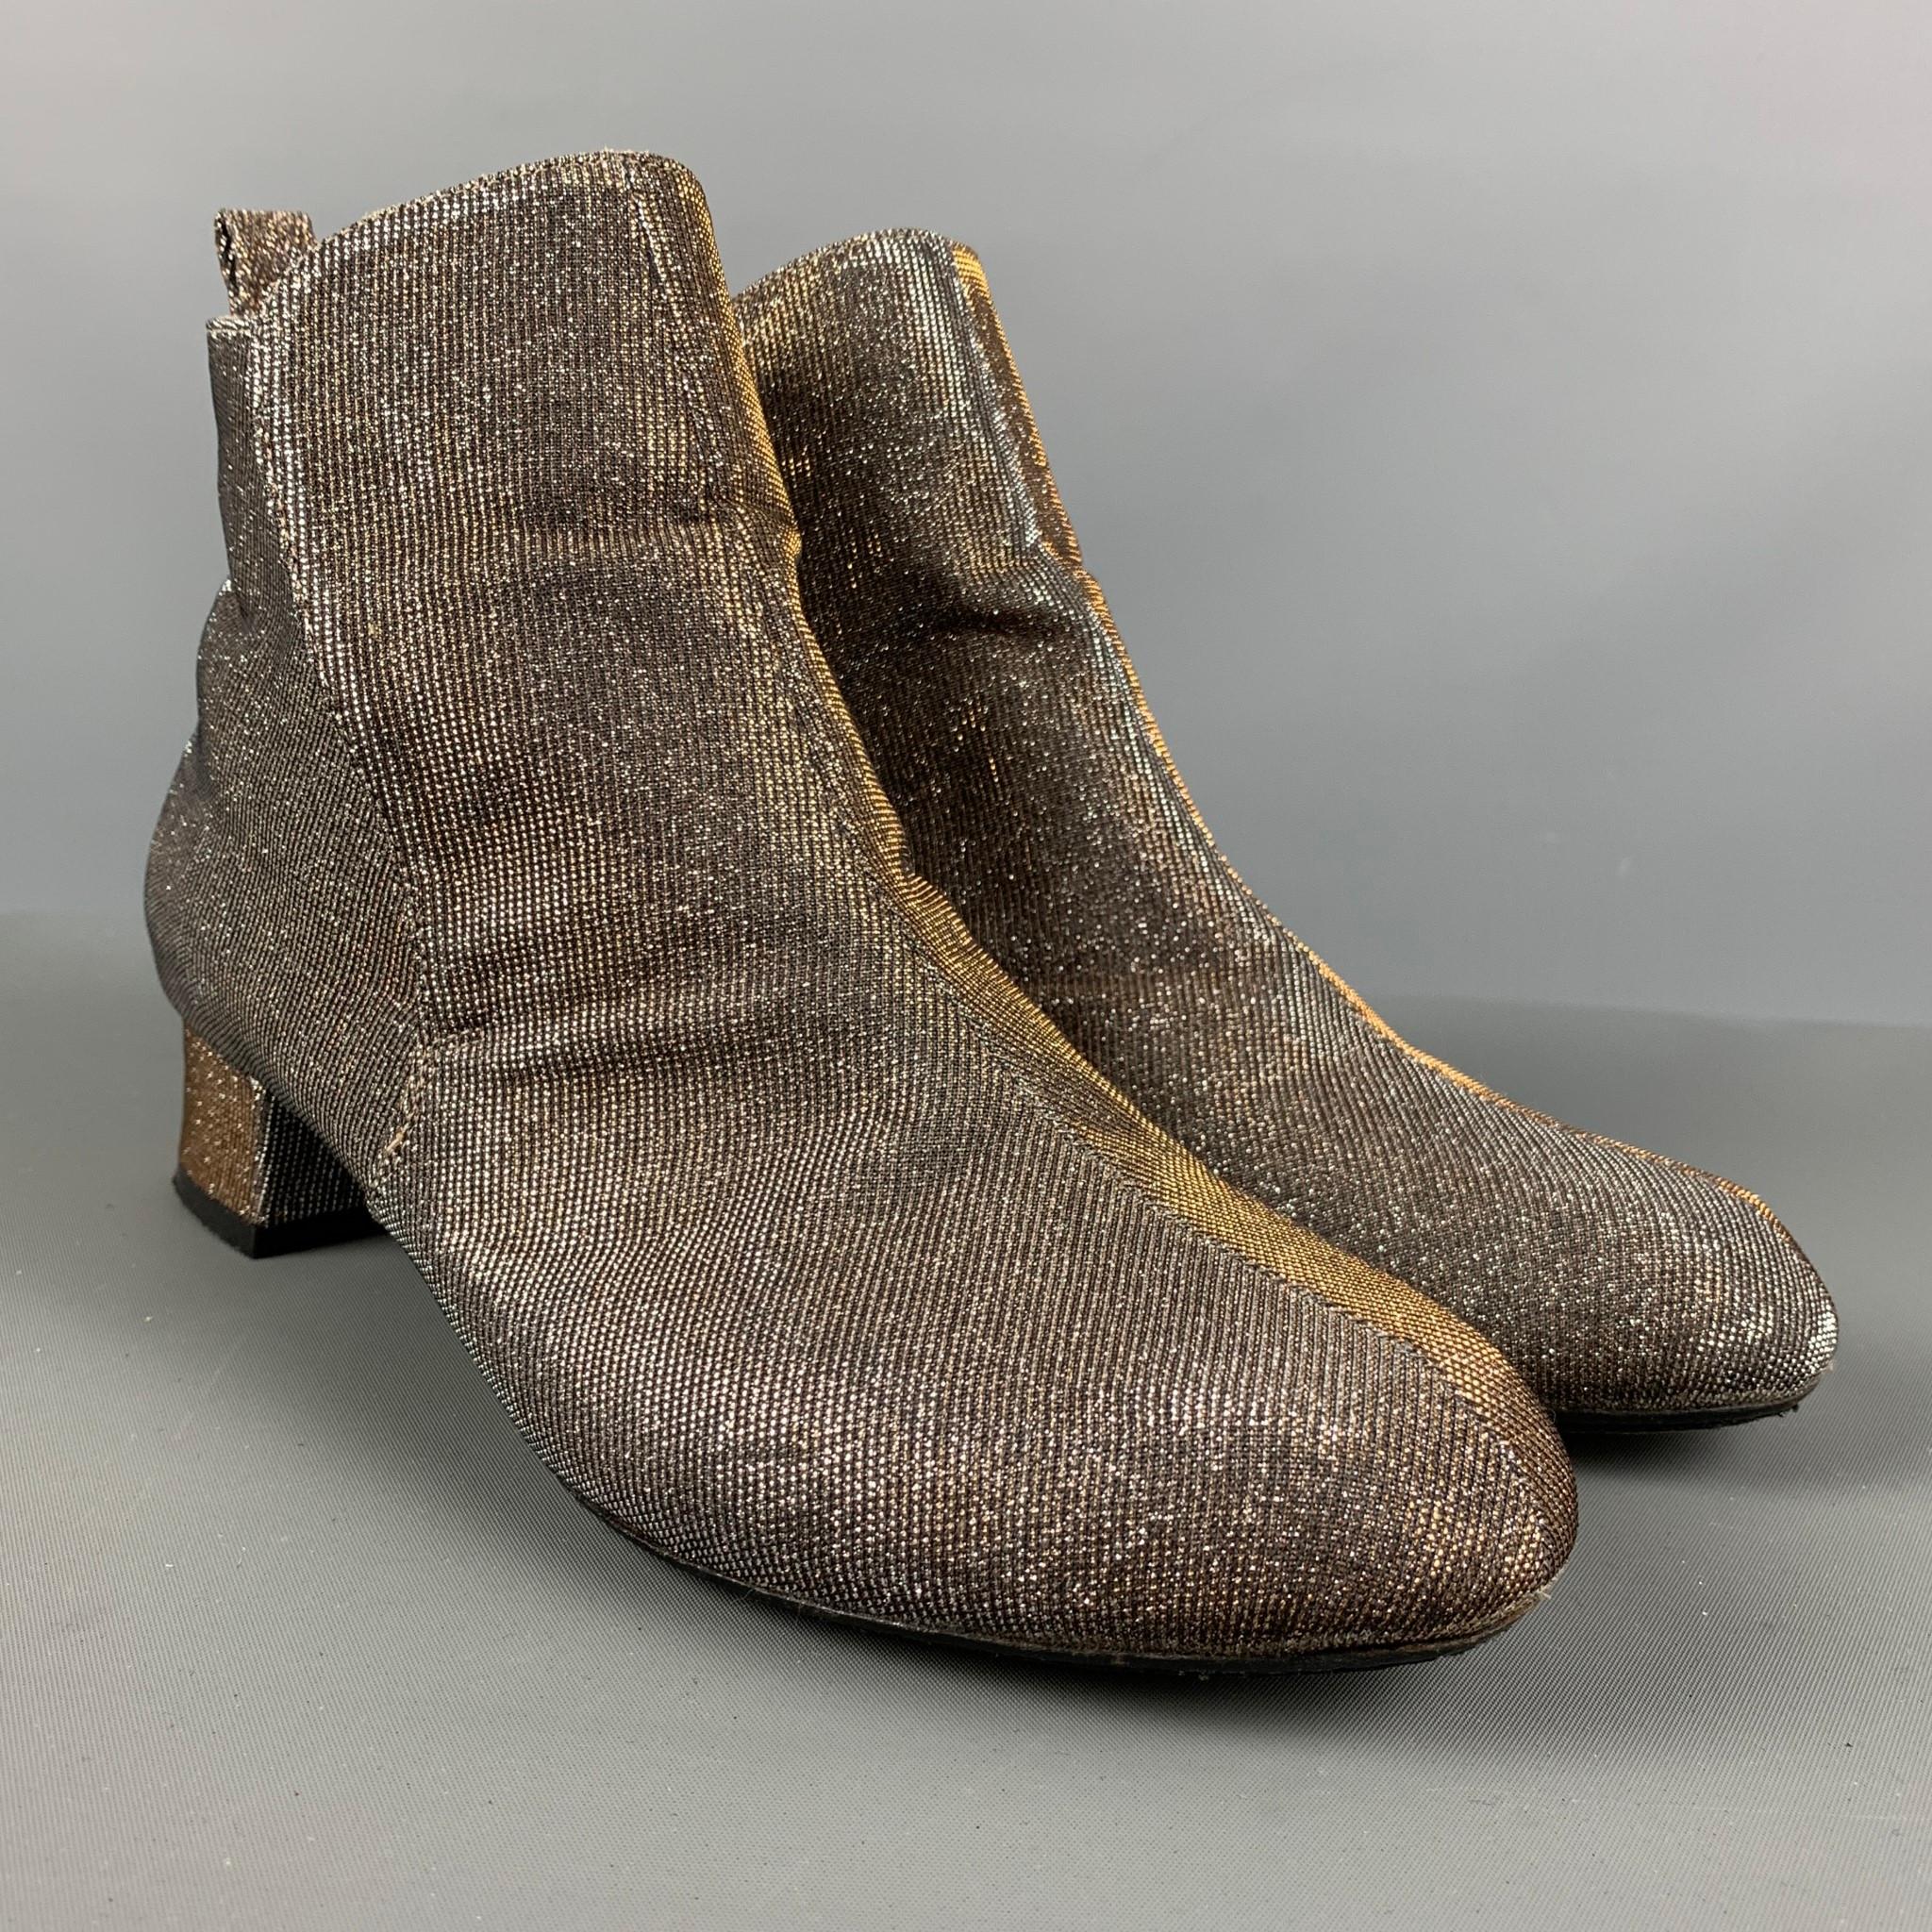 ROBERT CLERGERIE ankle boots comes in a silver and gold metallic fabric material featuring shiny look, and pull on style.

Very Good Pre-Owned Condition. 
Marked: 38 1/2

Measurements:

Length: 10 in.
Width: 3 in.
Hells: 1.5 in.   

SKU: